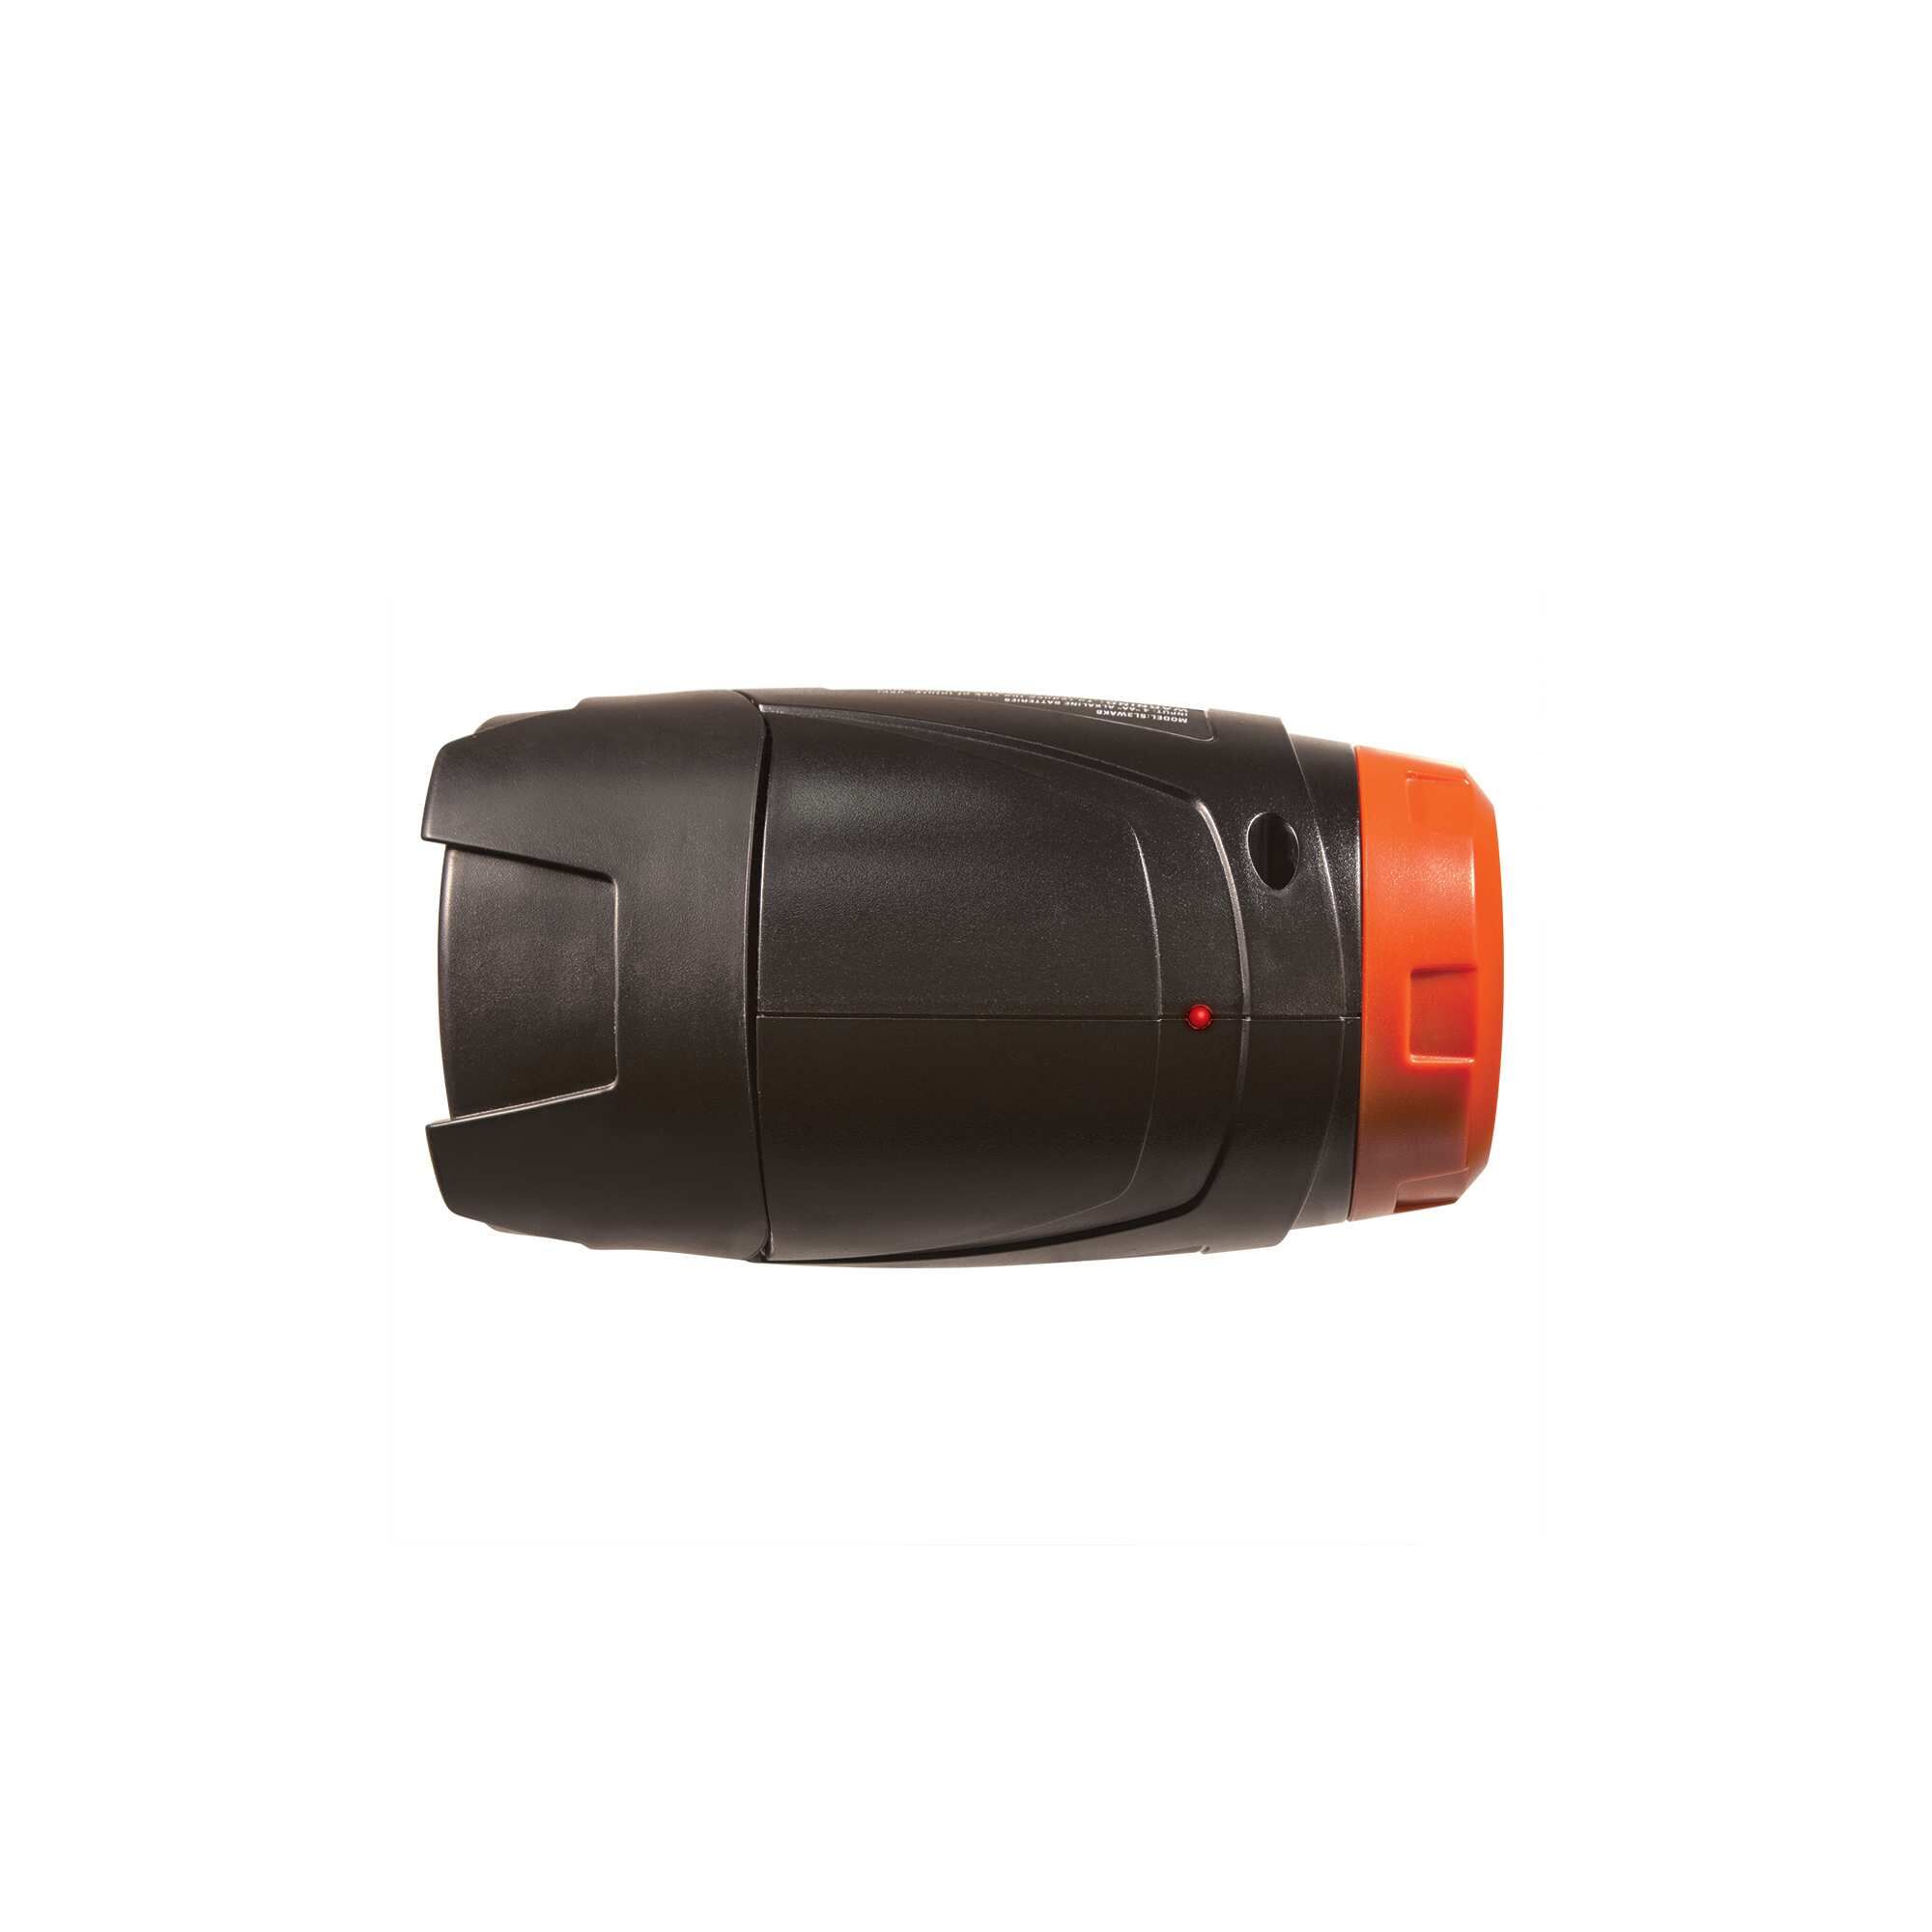 LED indicator feature of black and decker compact flashlight with LED indicator.